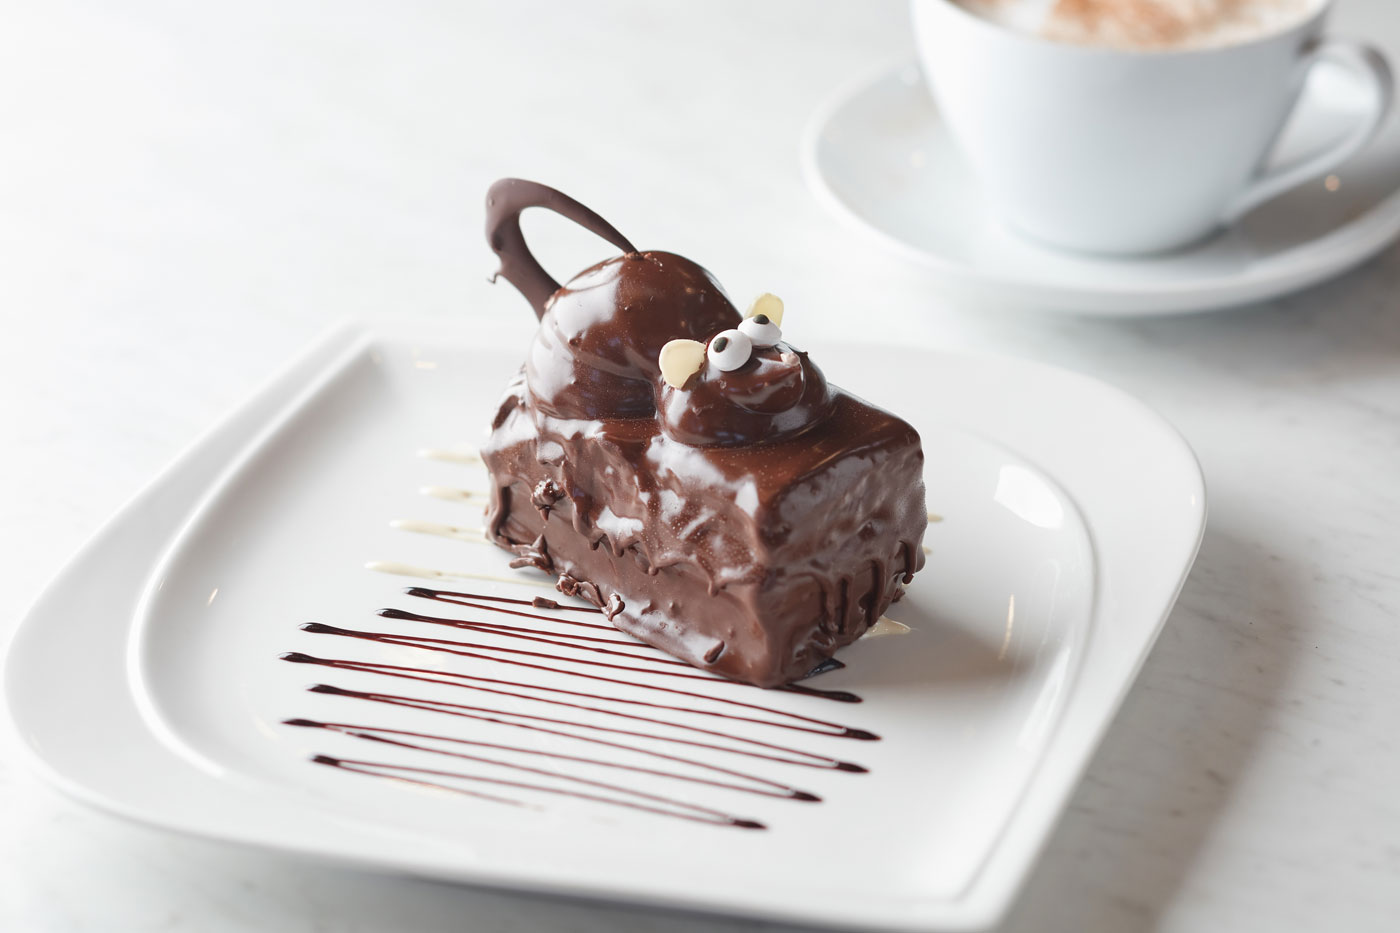 West Essex Diner Chocholate Mouse